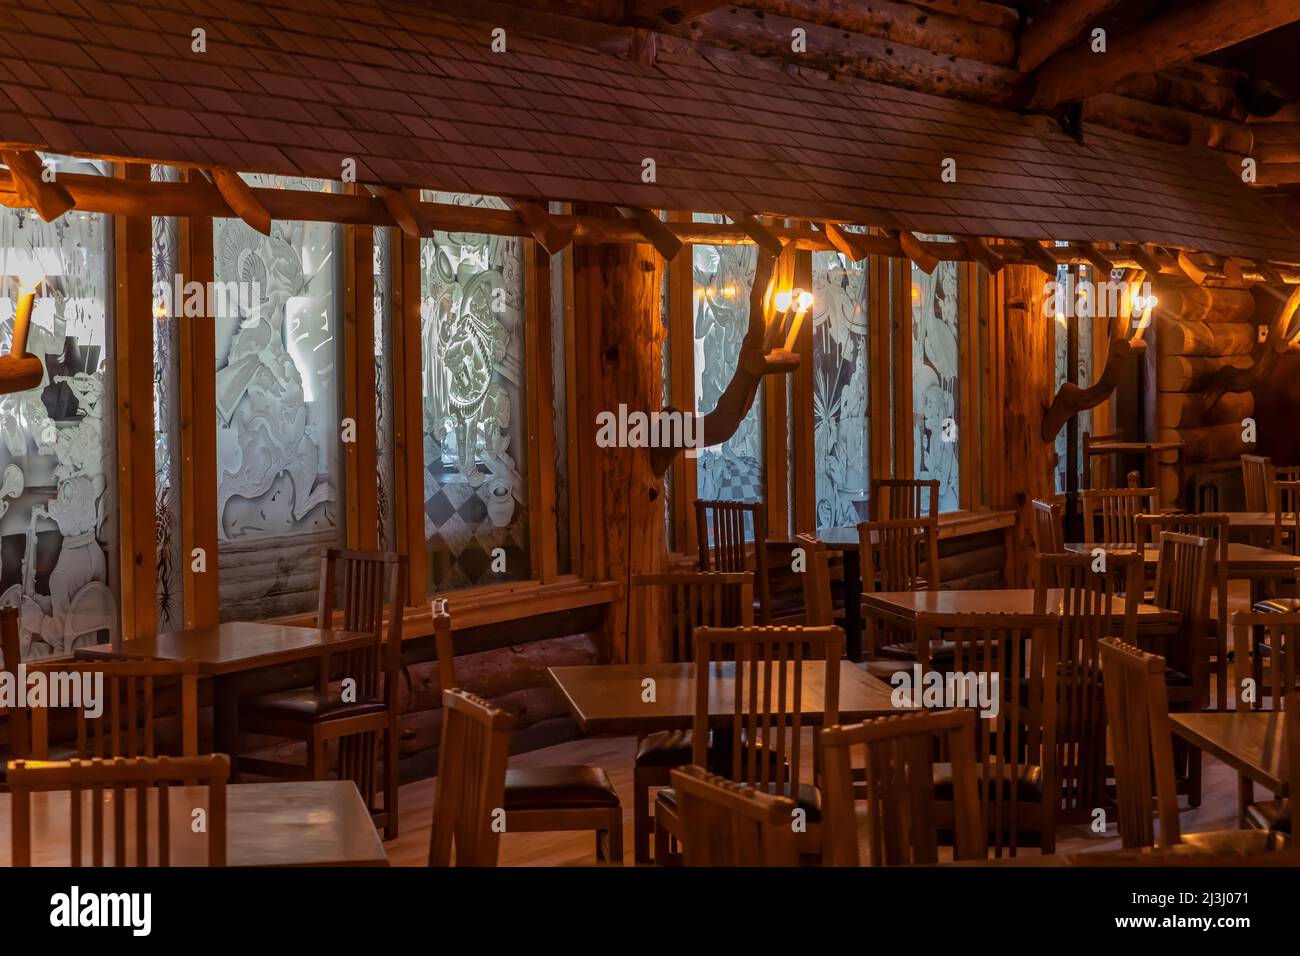 https://c8.alamy.com/comp/2J3J071/old-faithful-inn-dining-room-in-old-faithful-inn-in-yellowstone-national-park-wyoming-usa-no-property-or-artist-release-editorial-licensing-only-2J3J071.jpg